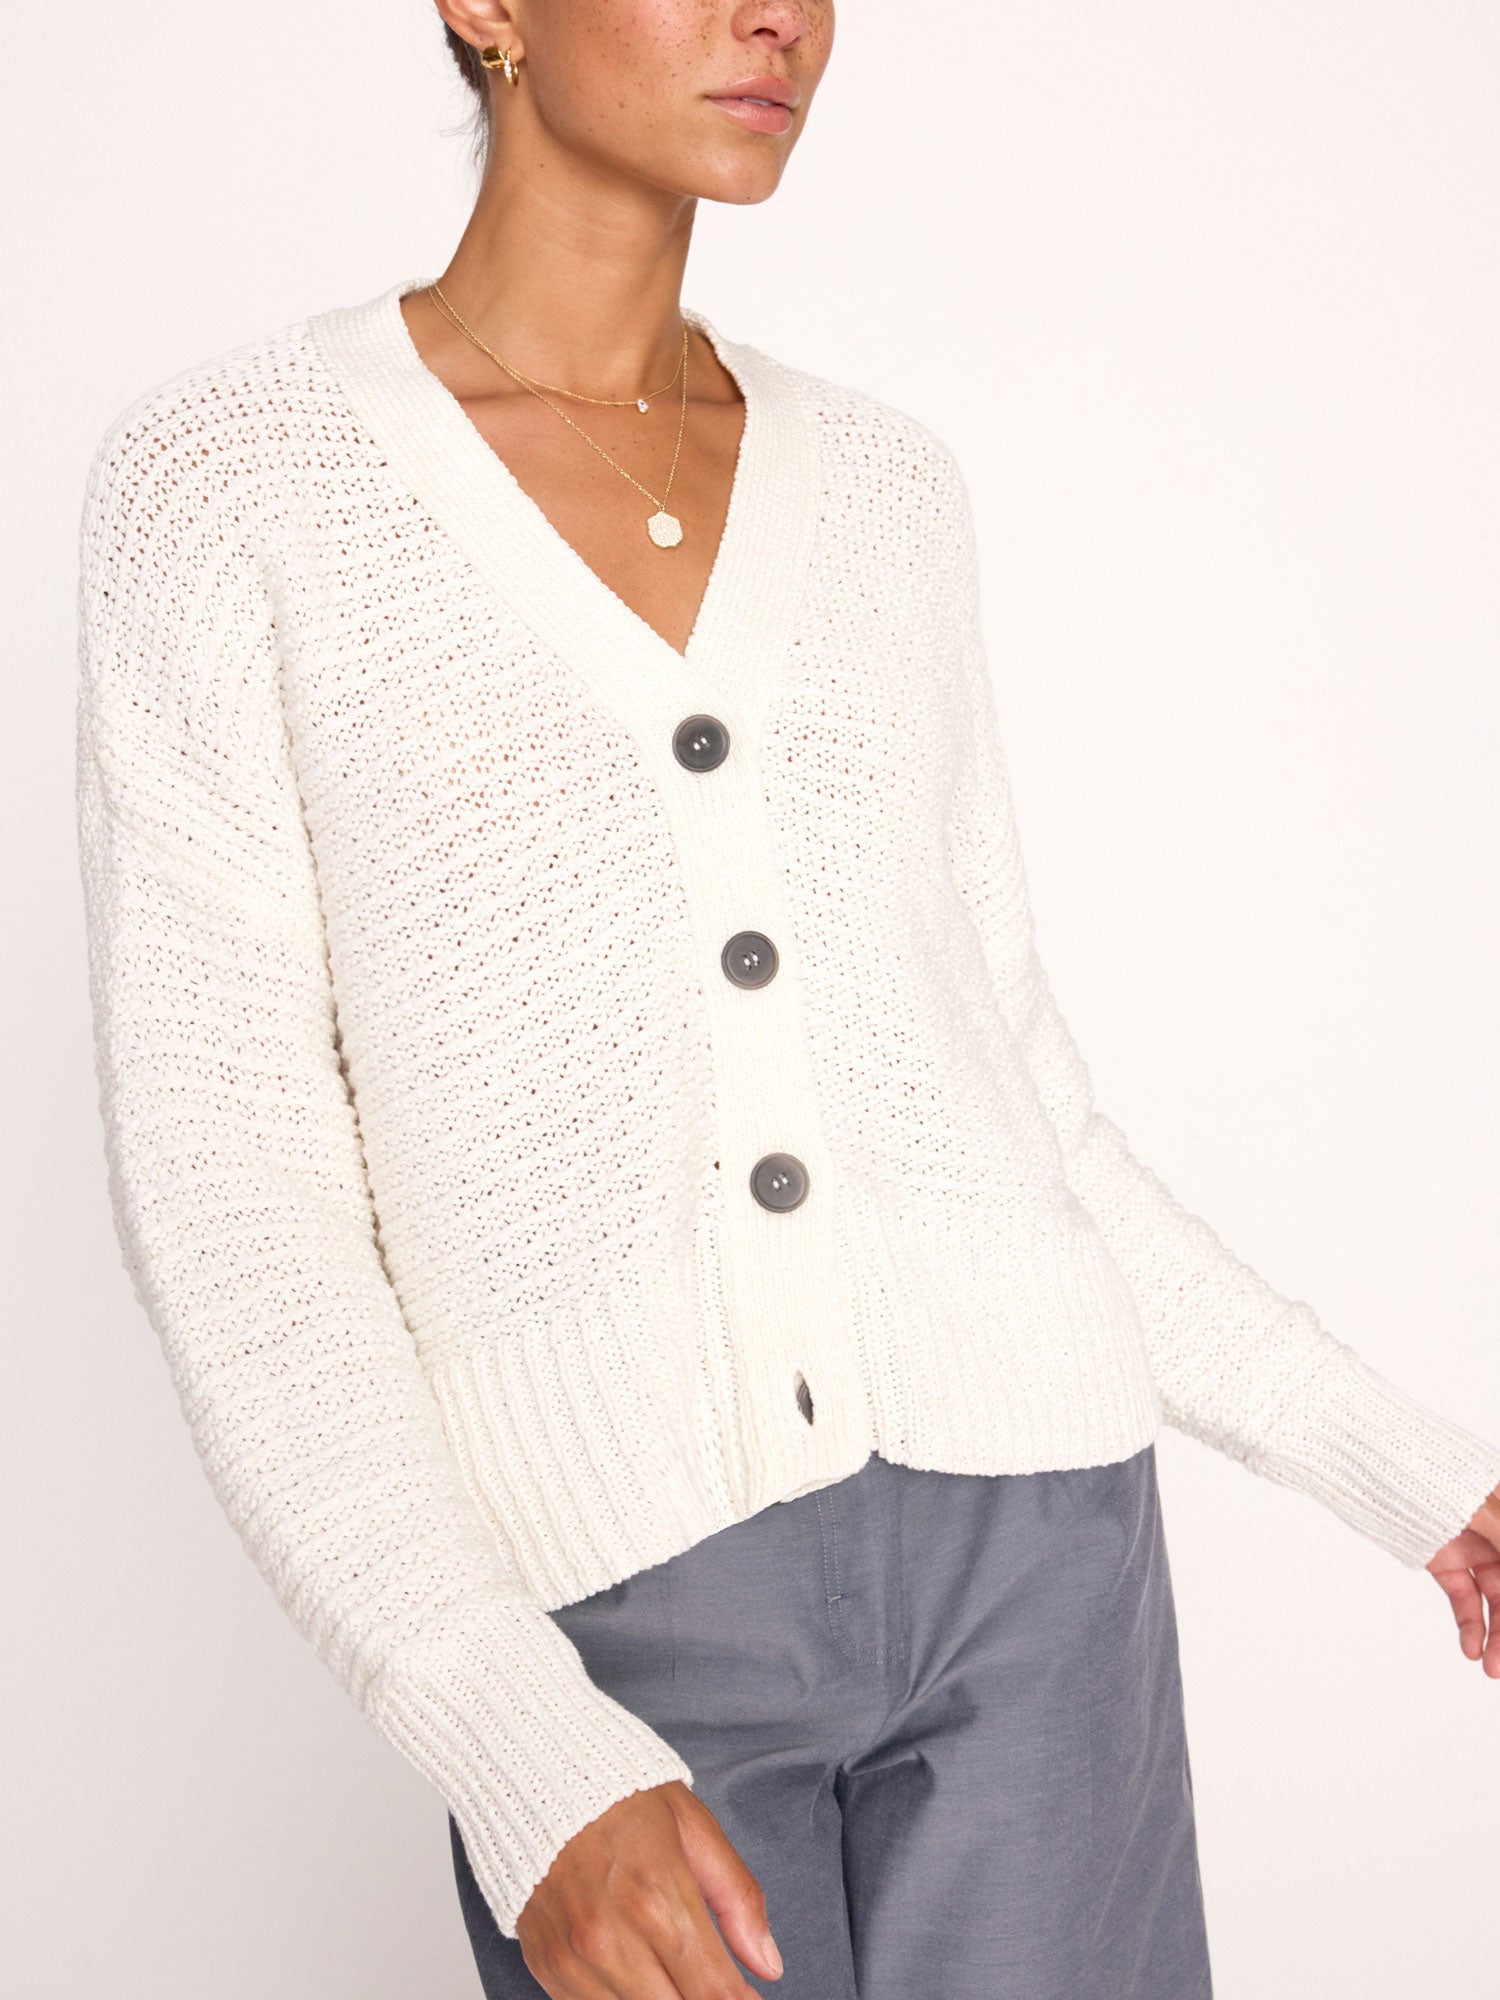 Sia cotton white cardigan sweater front view 2